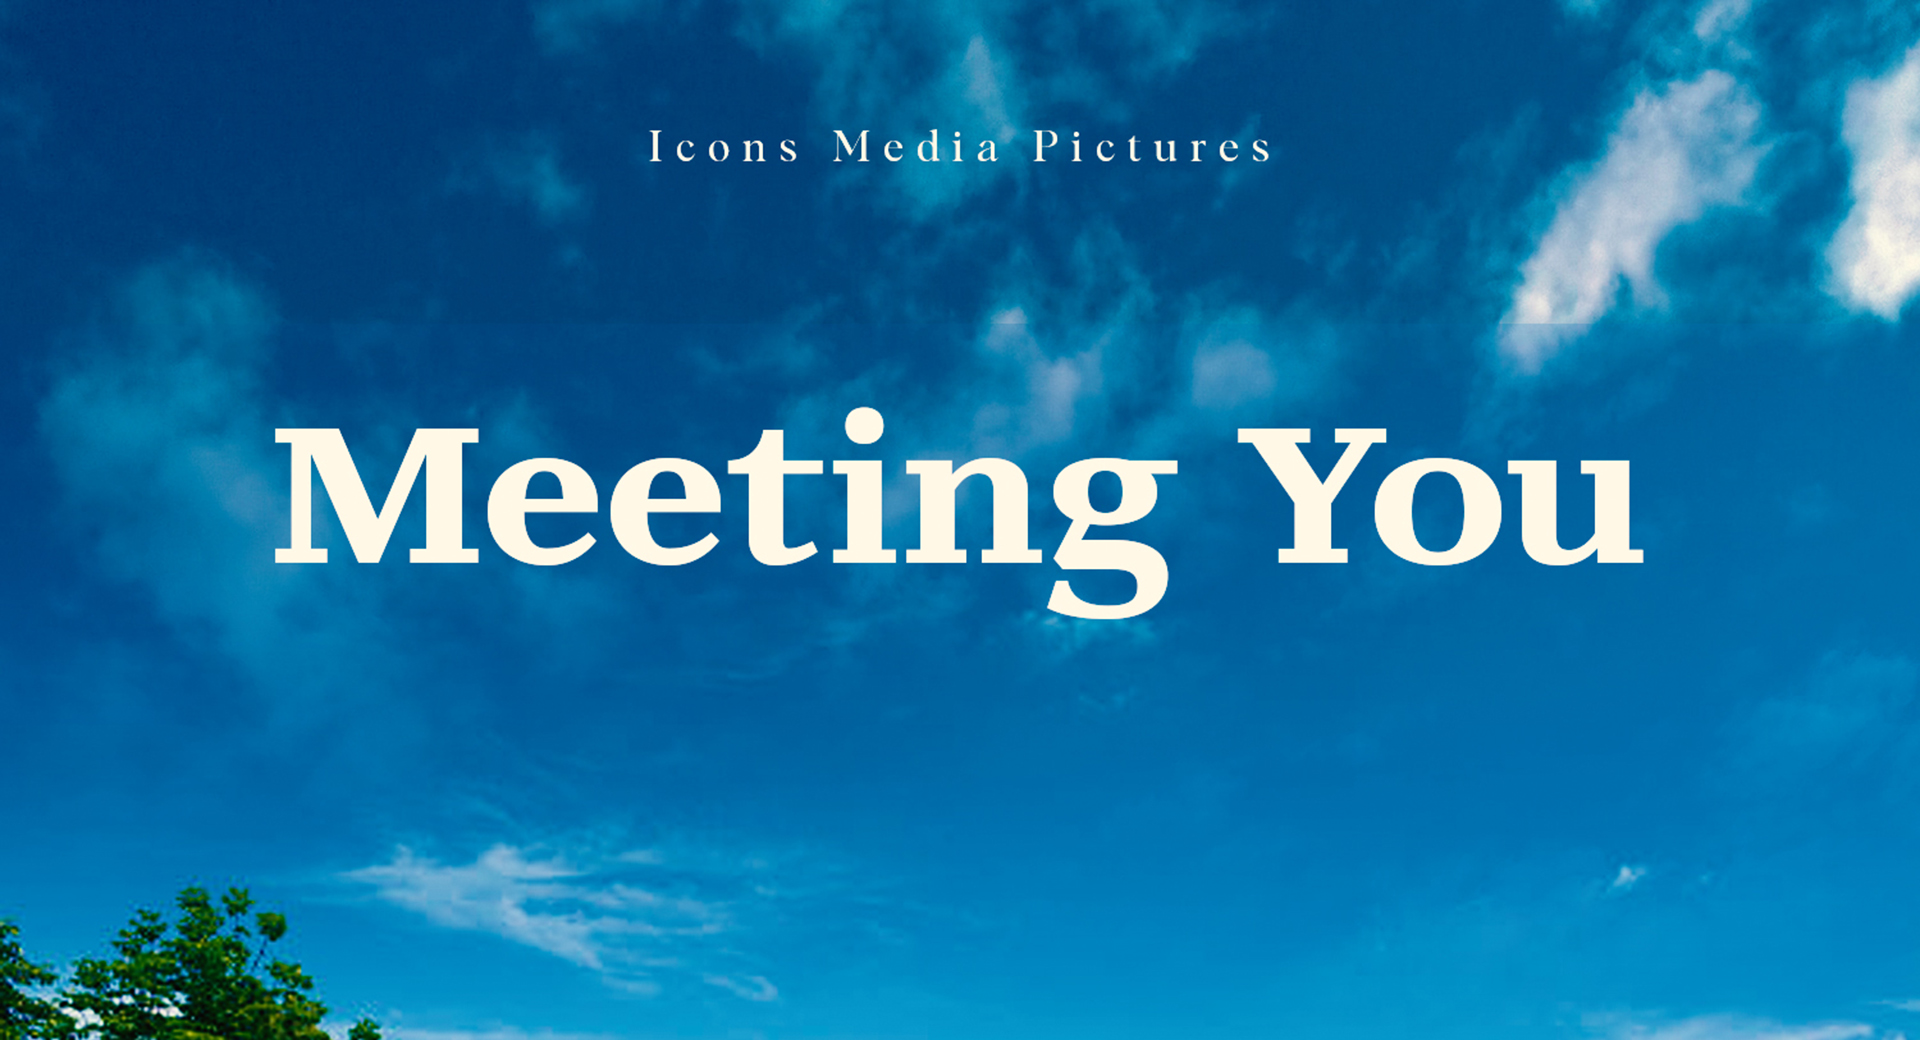 Meeting You Trailer - Cover Photo